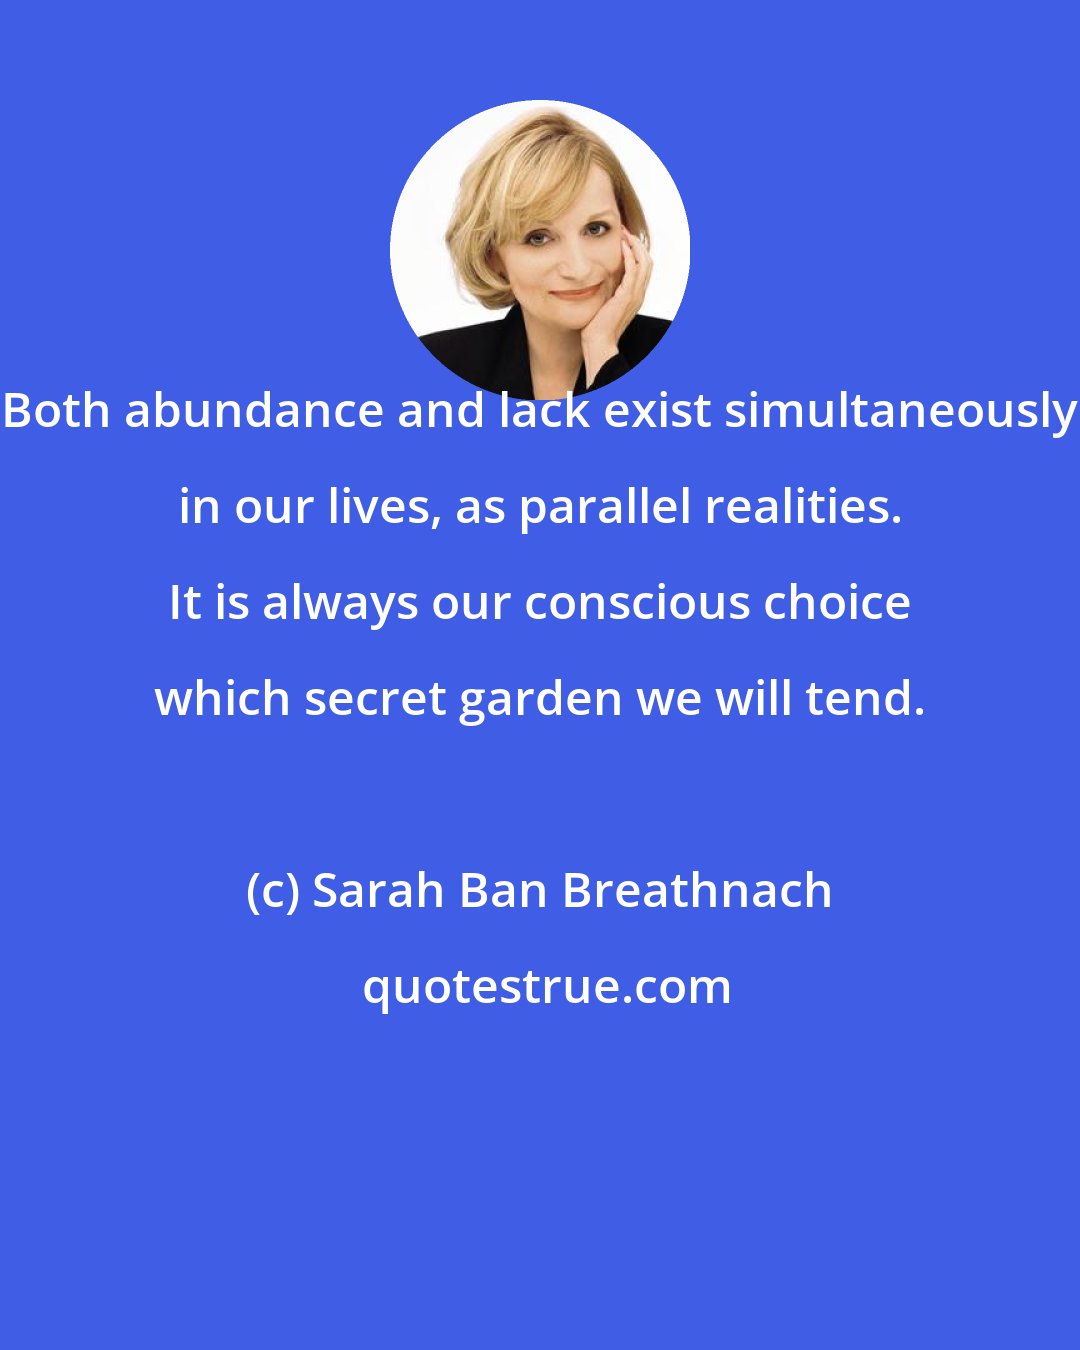 Sarah Ban Breathnach: Both abundance and lack exist simultaneously in our lives, as parallel realities. It is always our conscious choice which secret garden we will tend.